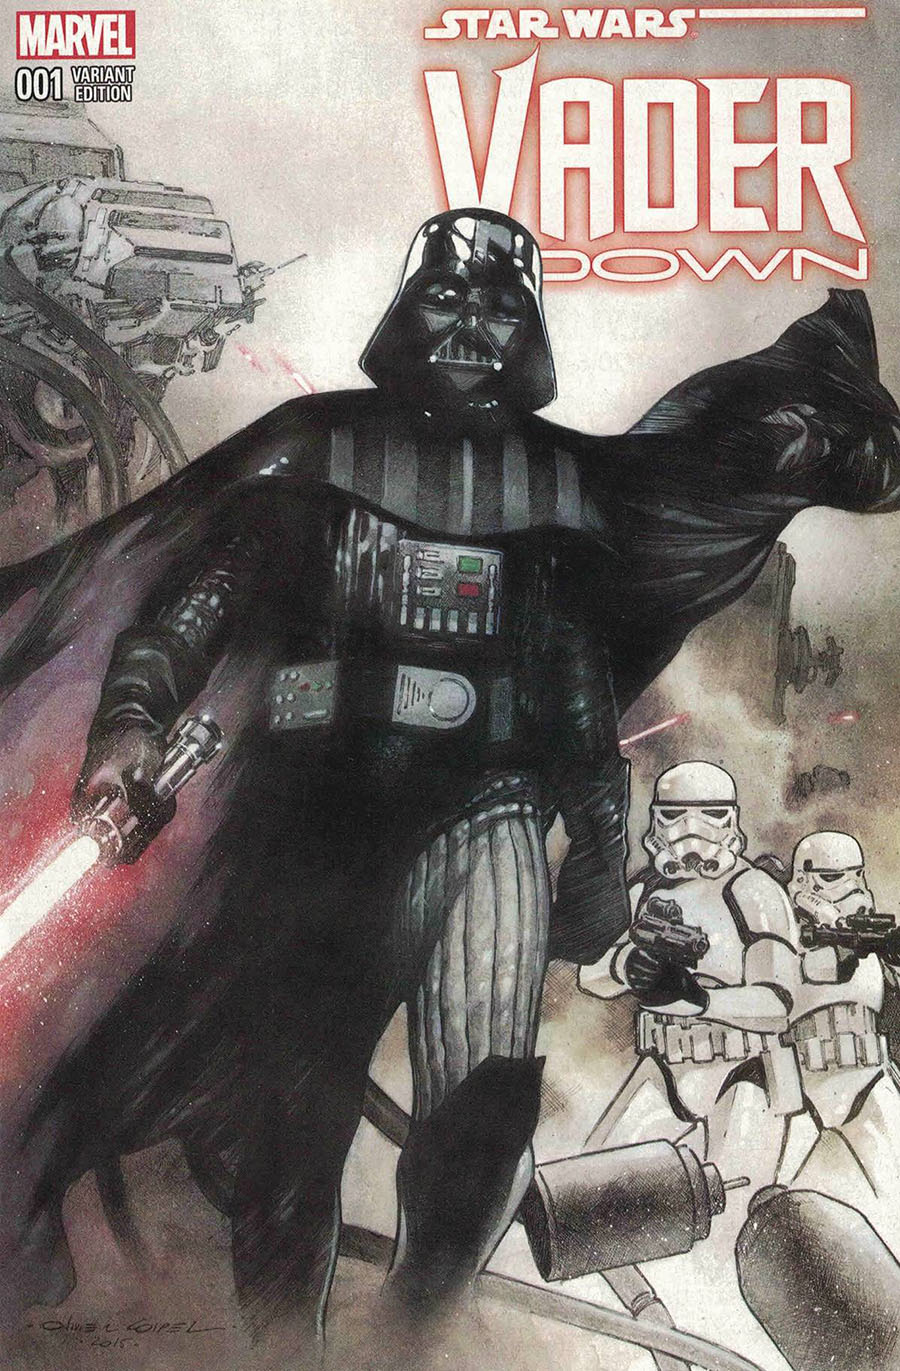 Star Wars Vader Down #1 DF Exclusive Olivier Coipel Color And Black & White Variant Cover Set